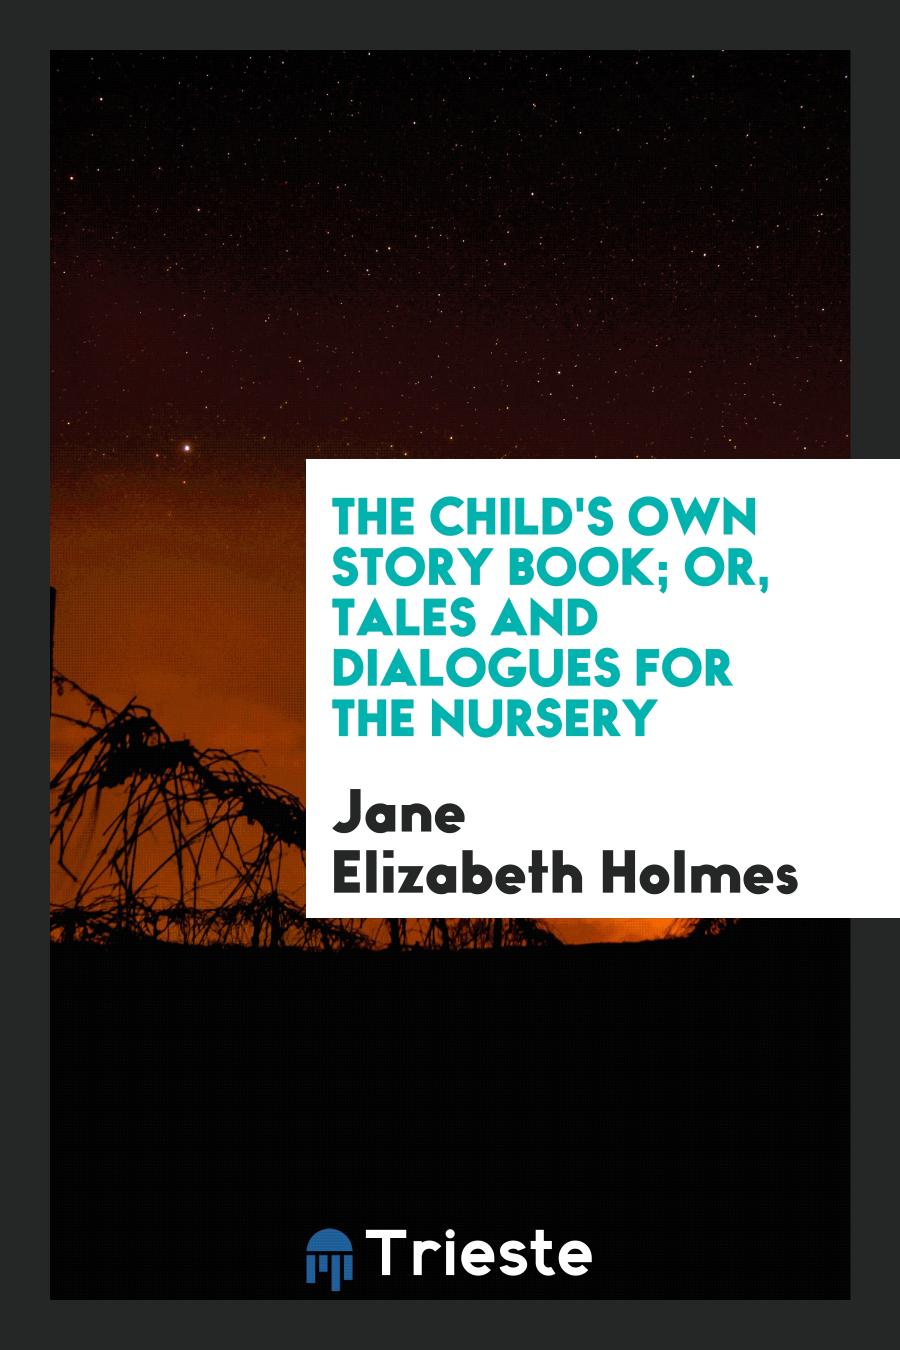 The Child's Own Story Book; Or, Tales and Dialogues for the Nursery